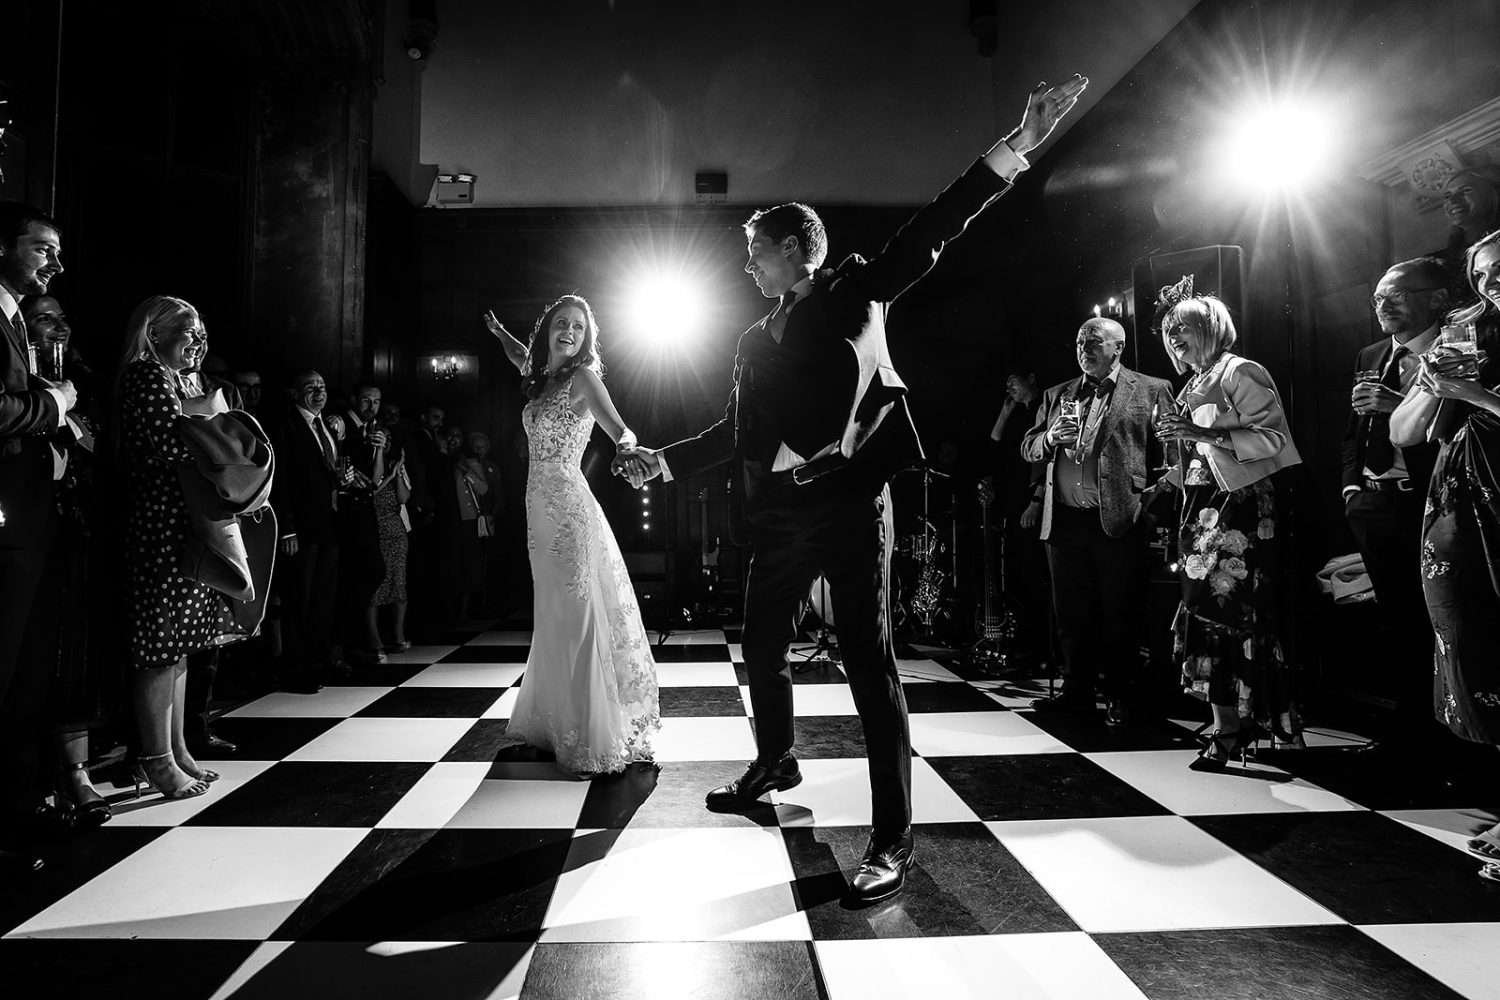 A bride and groom perfrom their first dance at their wedding. They are holding hands and in a dramatic pose. The couple are backlit by flash light and surrounded by their family and firnds who are smiling. The dance floor is covered in black and white tiles like a chess board.  